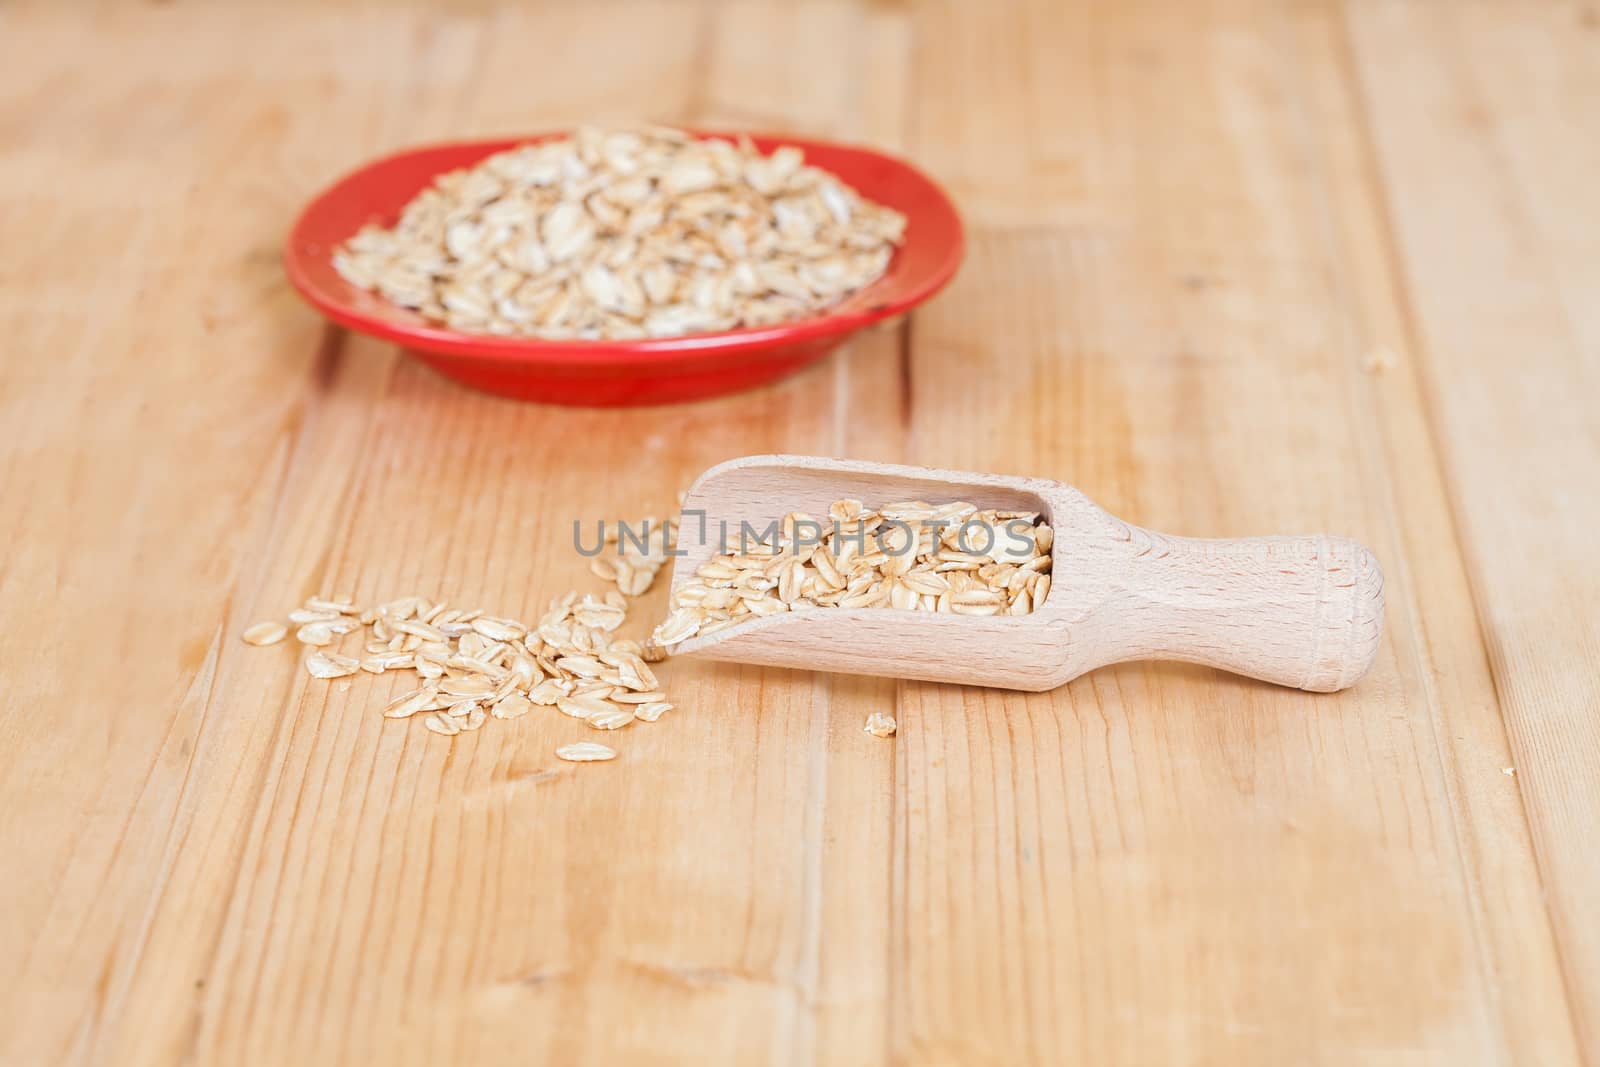 red dish and wood spoon with oats flakes pile on wood 
background.
